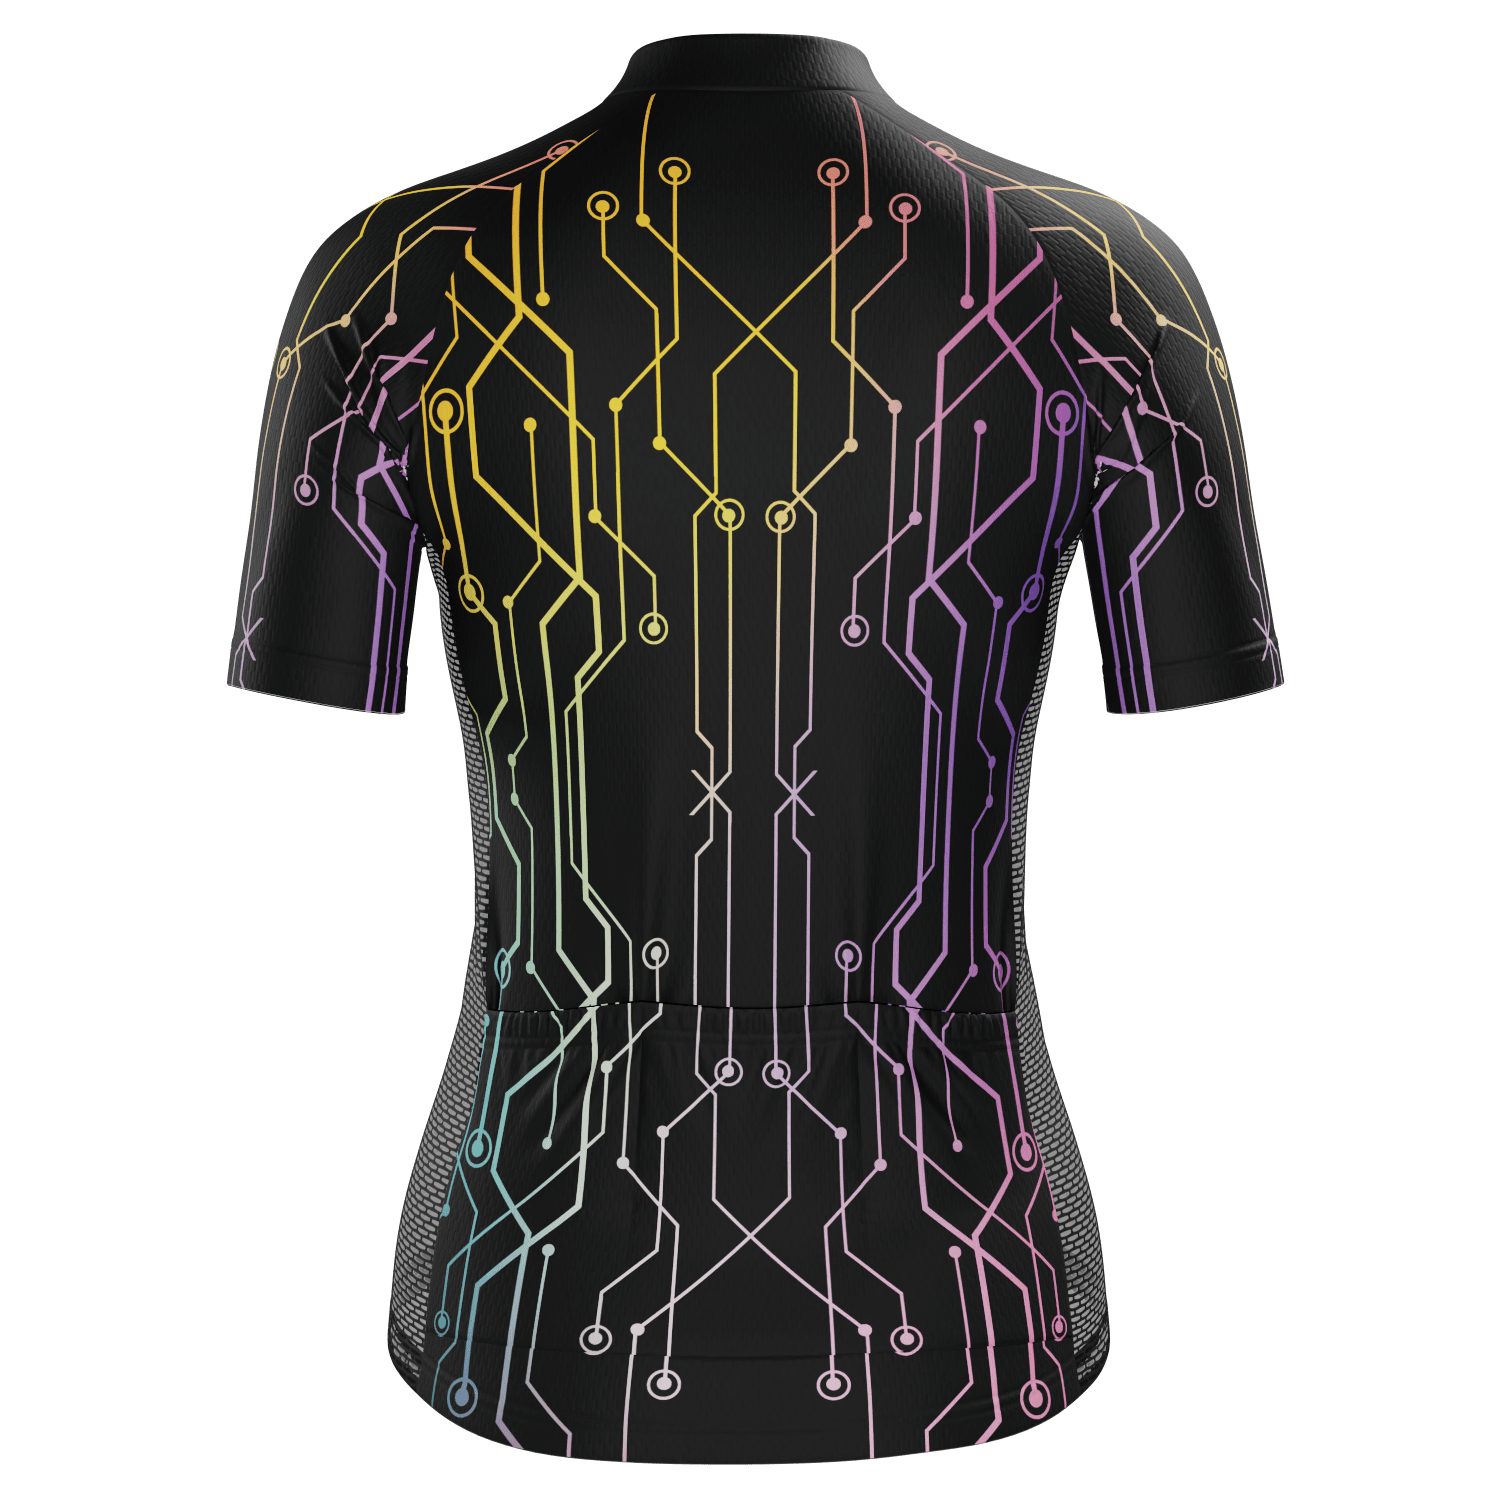 Women's Holographic Circuit Short Sleeve Cycling Jersey